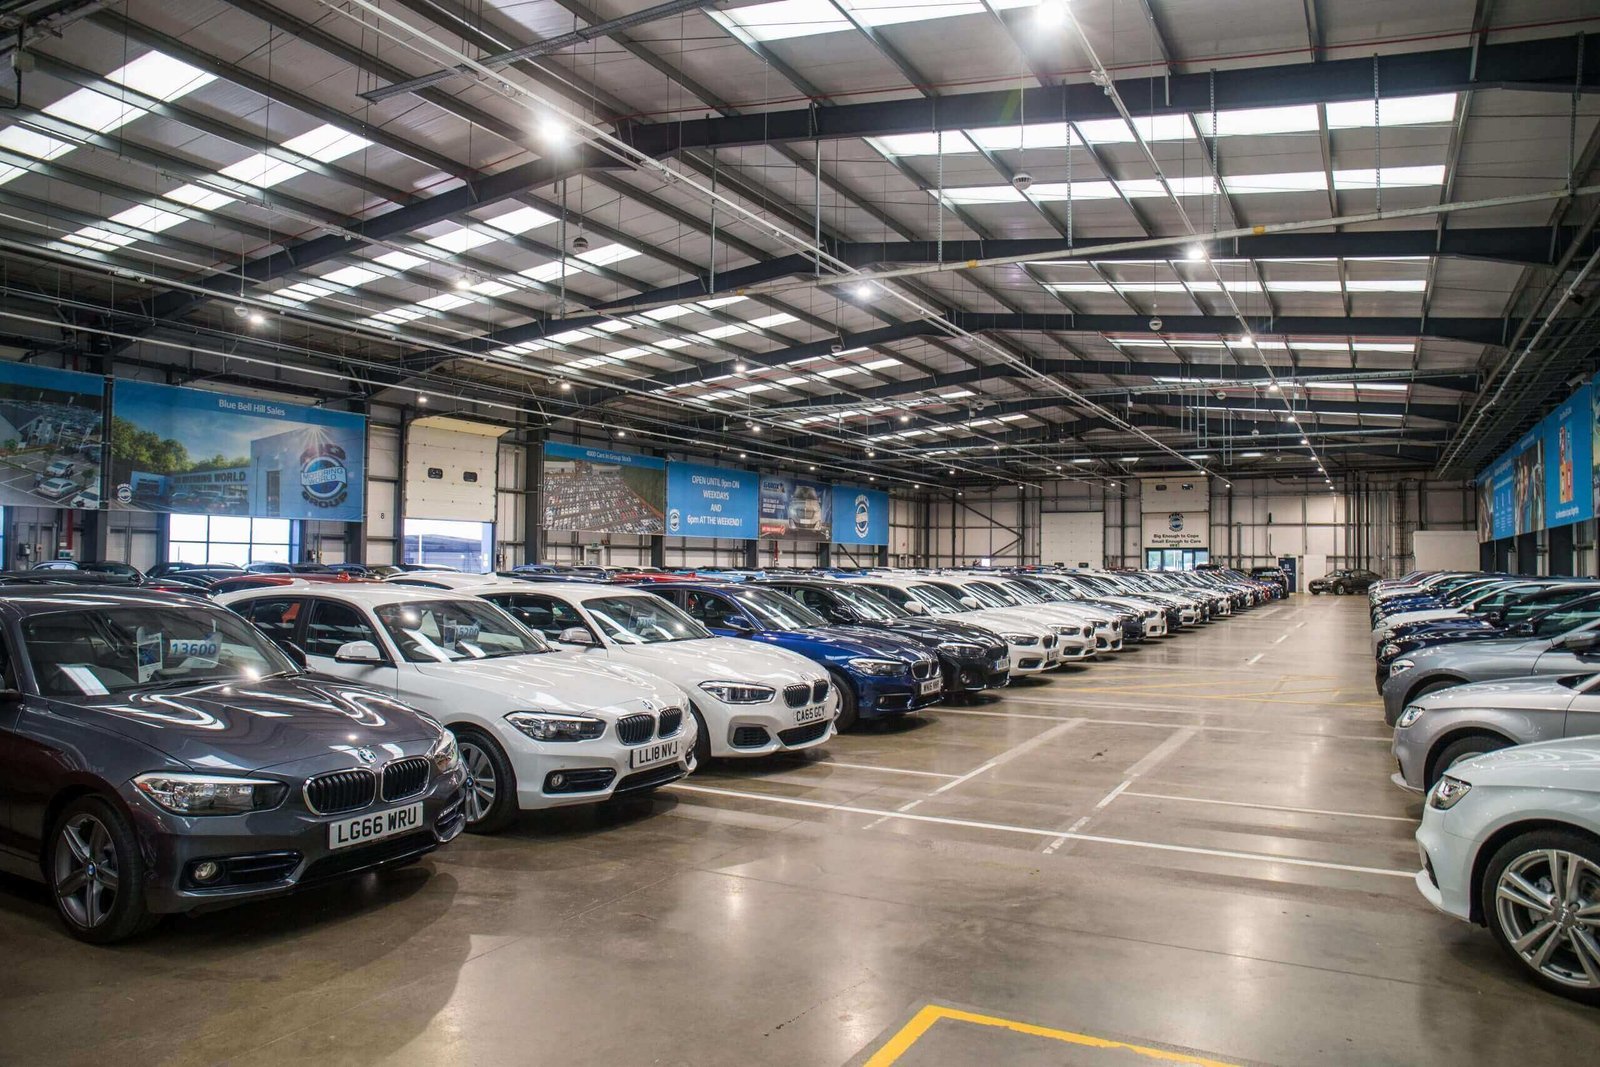 Looking for the best car dealers in the UK, find reliable and trustworthy car dealers like AutoTrader, Arnold Clark, Lookers